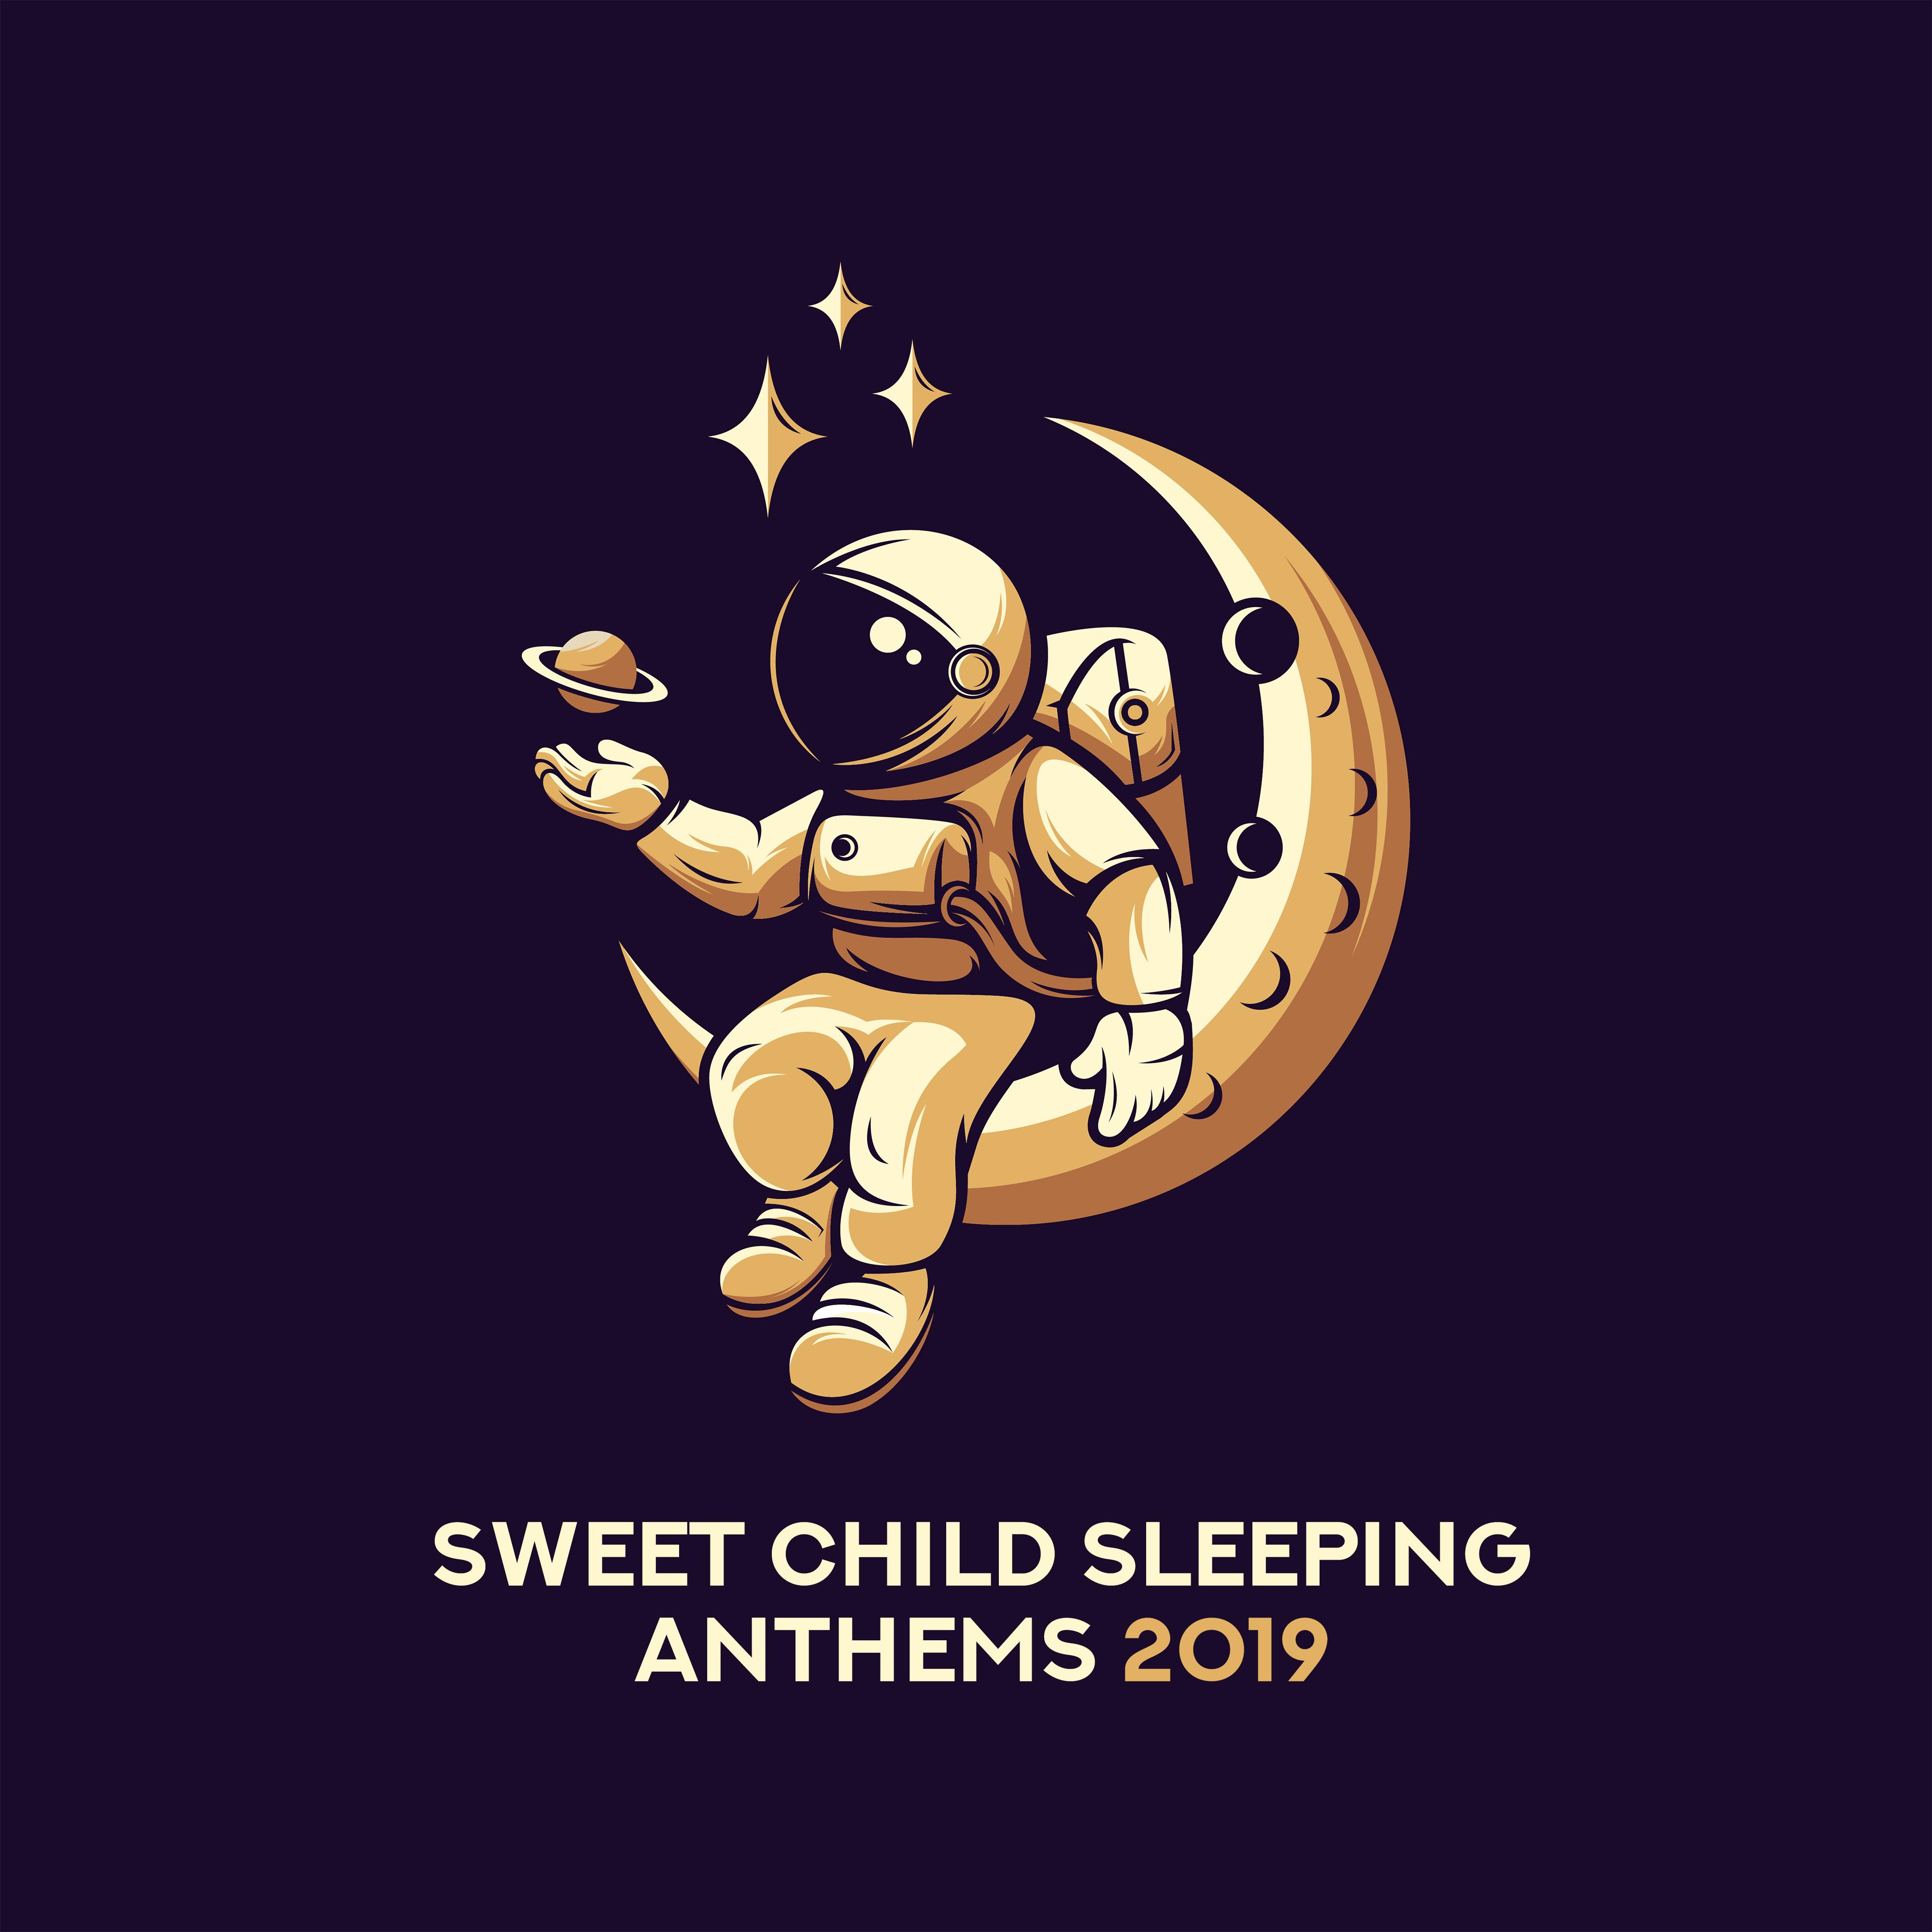 Sweet Child Sleeping Anthems 2019 – Piano Jazz Compilation for Perfect Sleep, Calm Night, Cure Insomnia